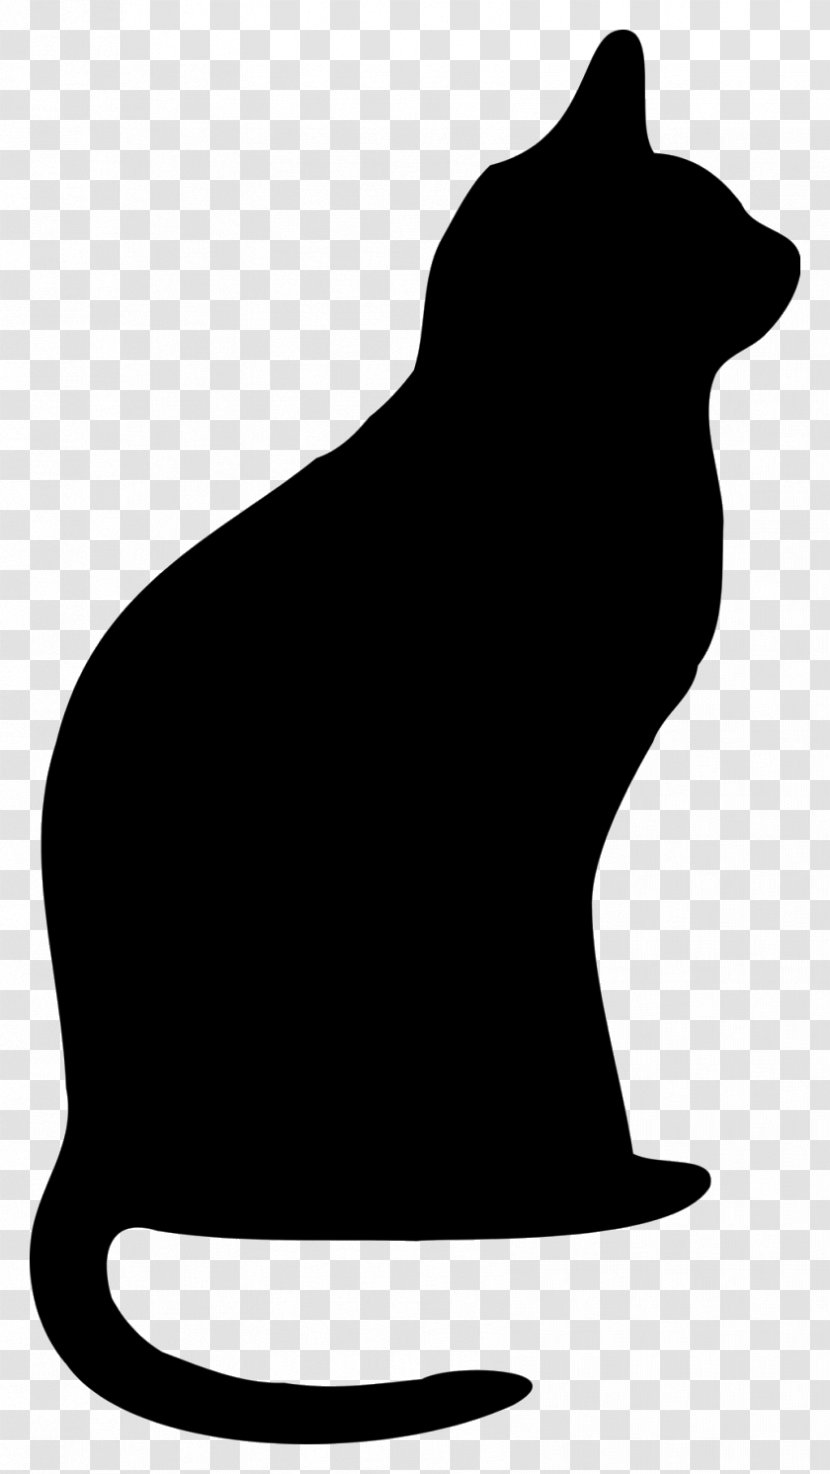 Cat Silhouette - Meow - Blackandwhite Tail Transparent PNG